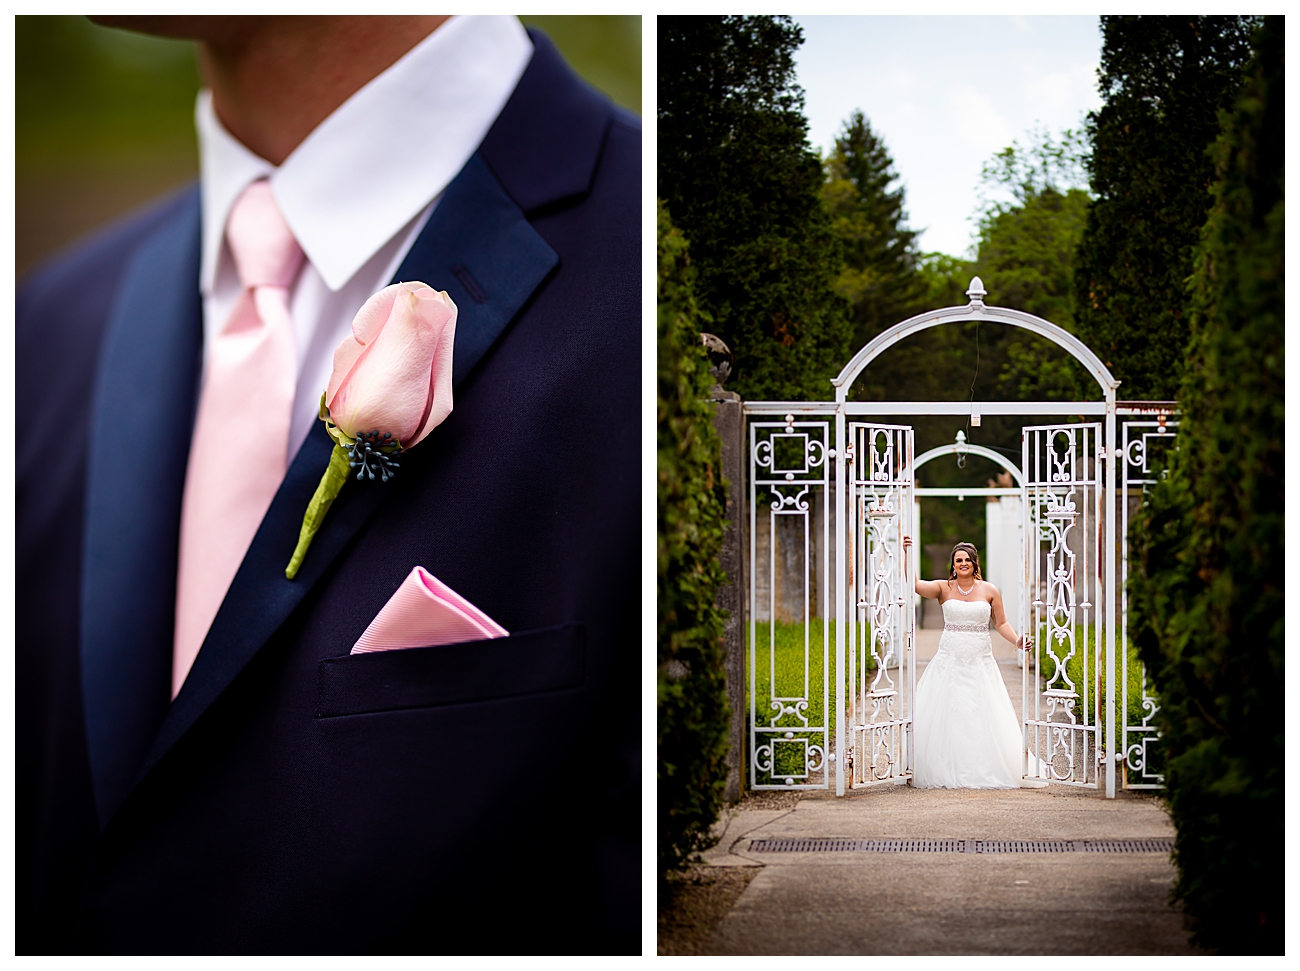 pink rose boutonniere